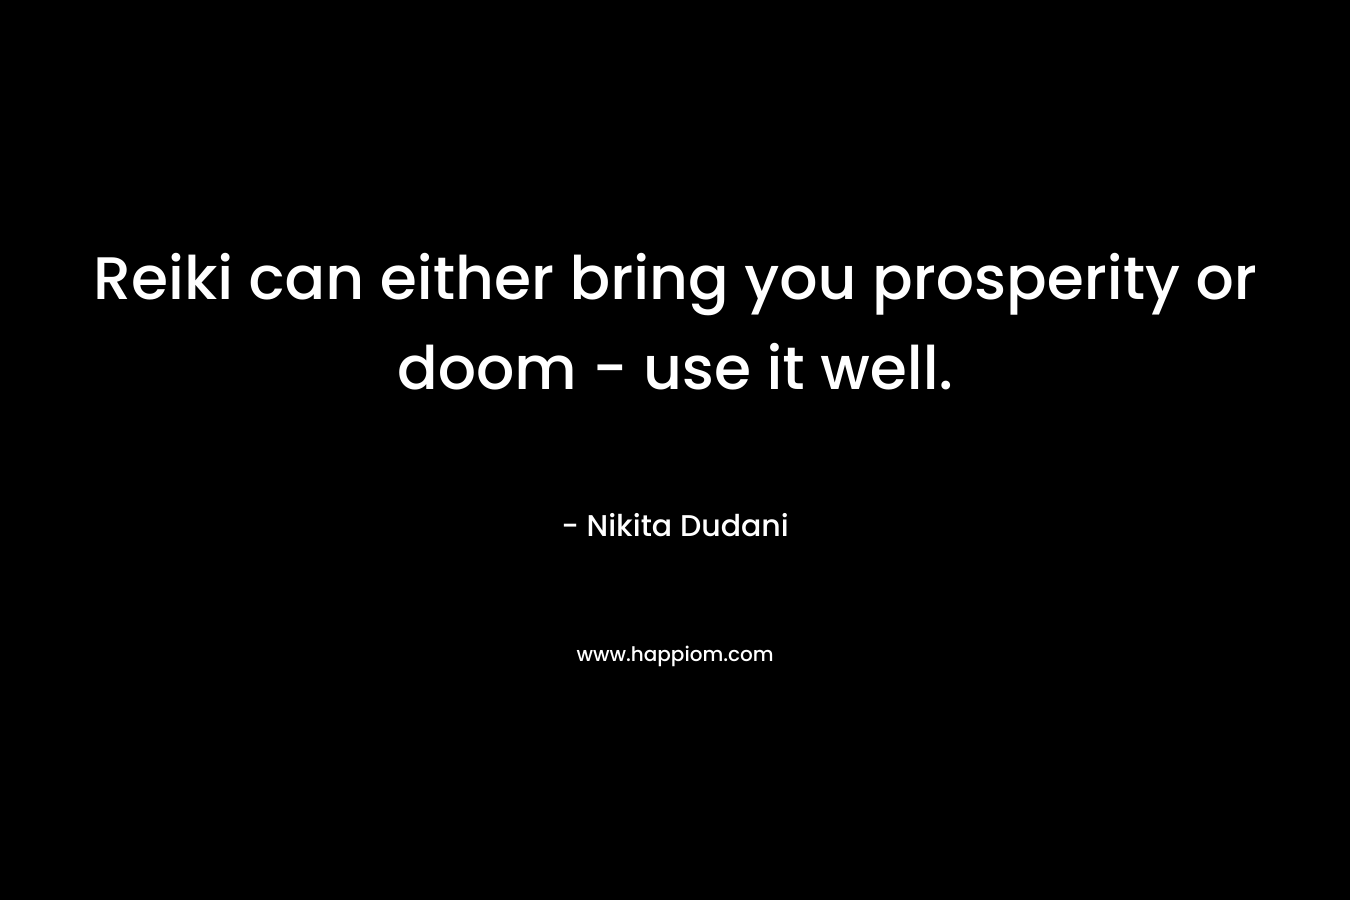 Reiki can either bring you prosperity or doom – use it well. – Nikita Dudani